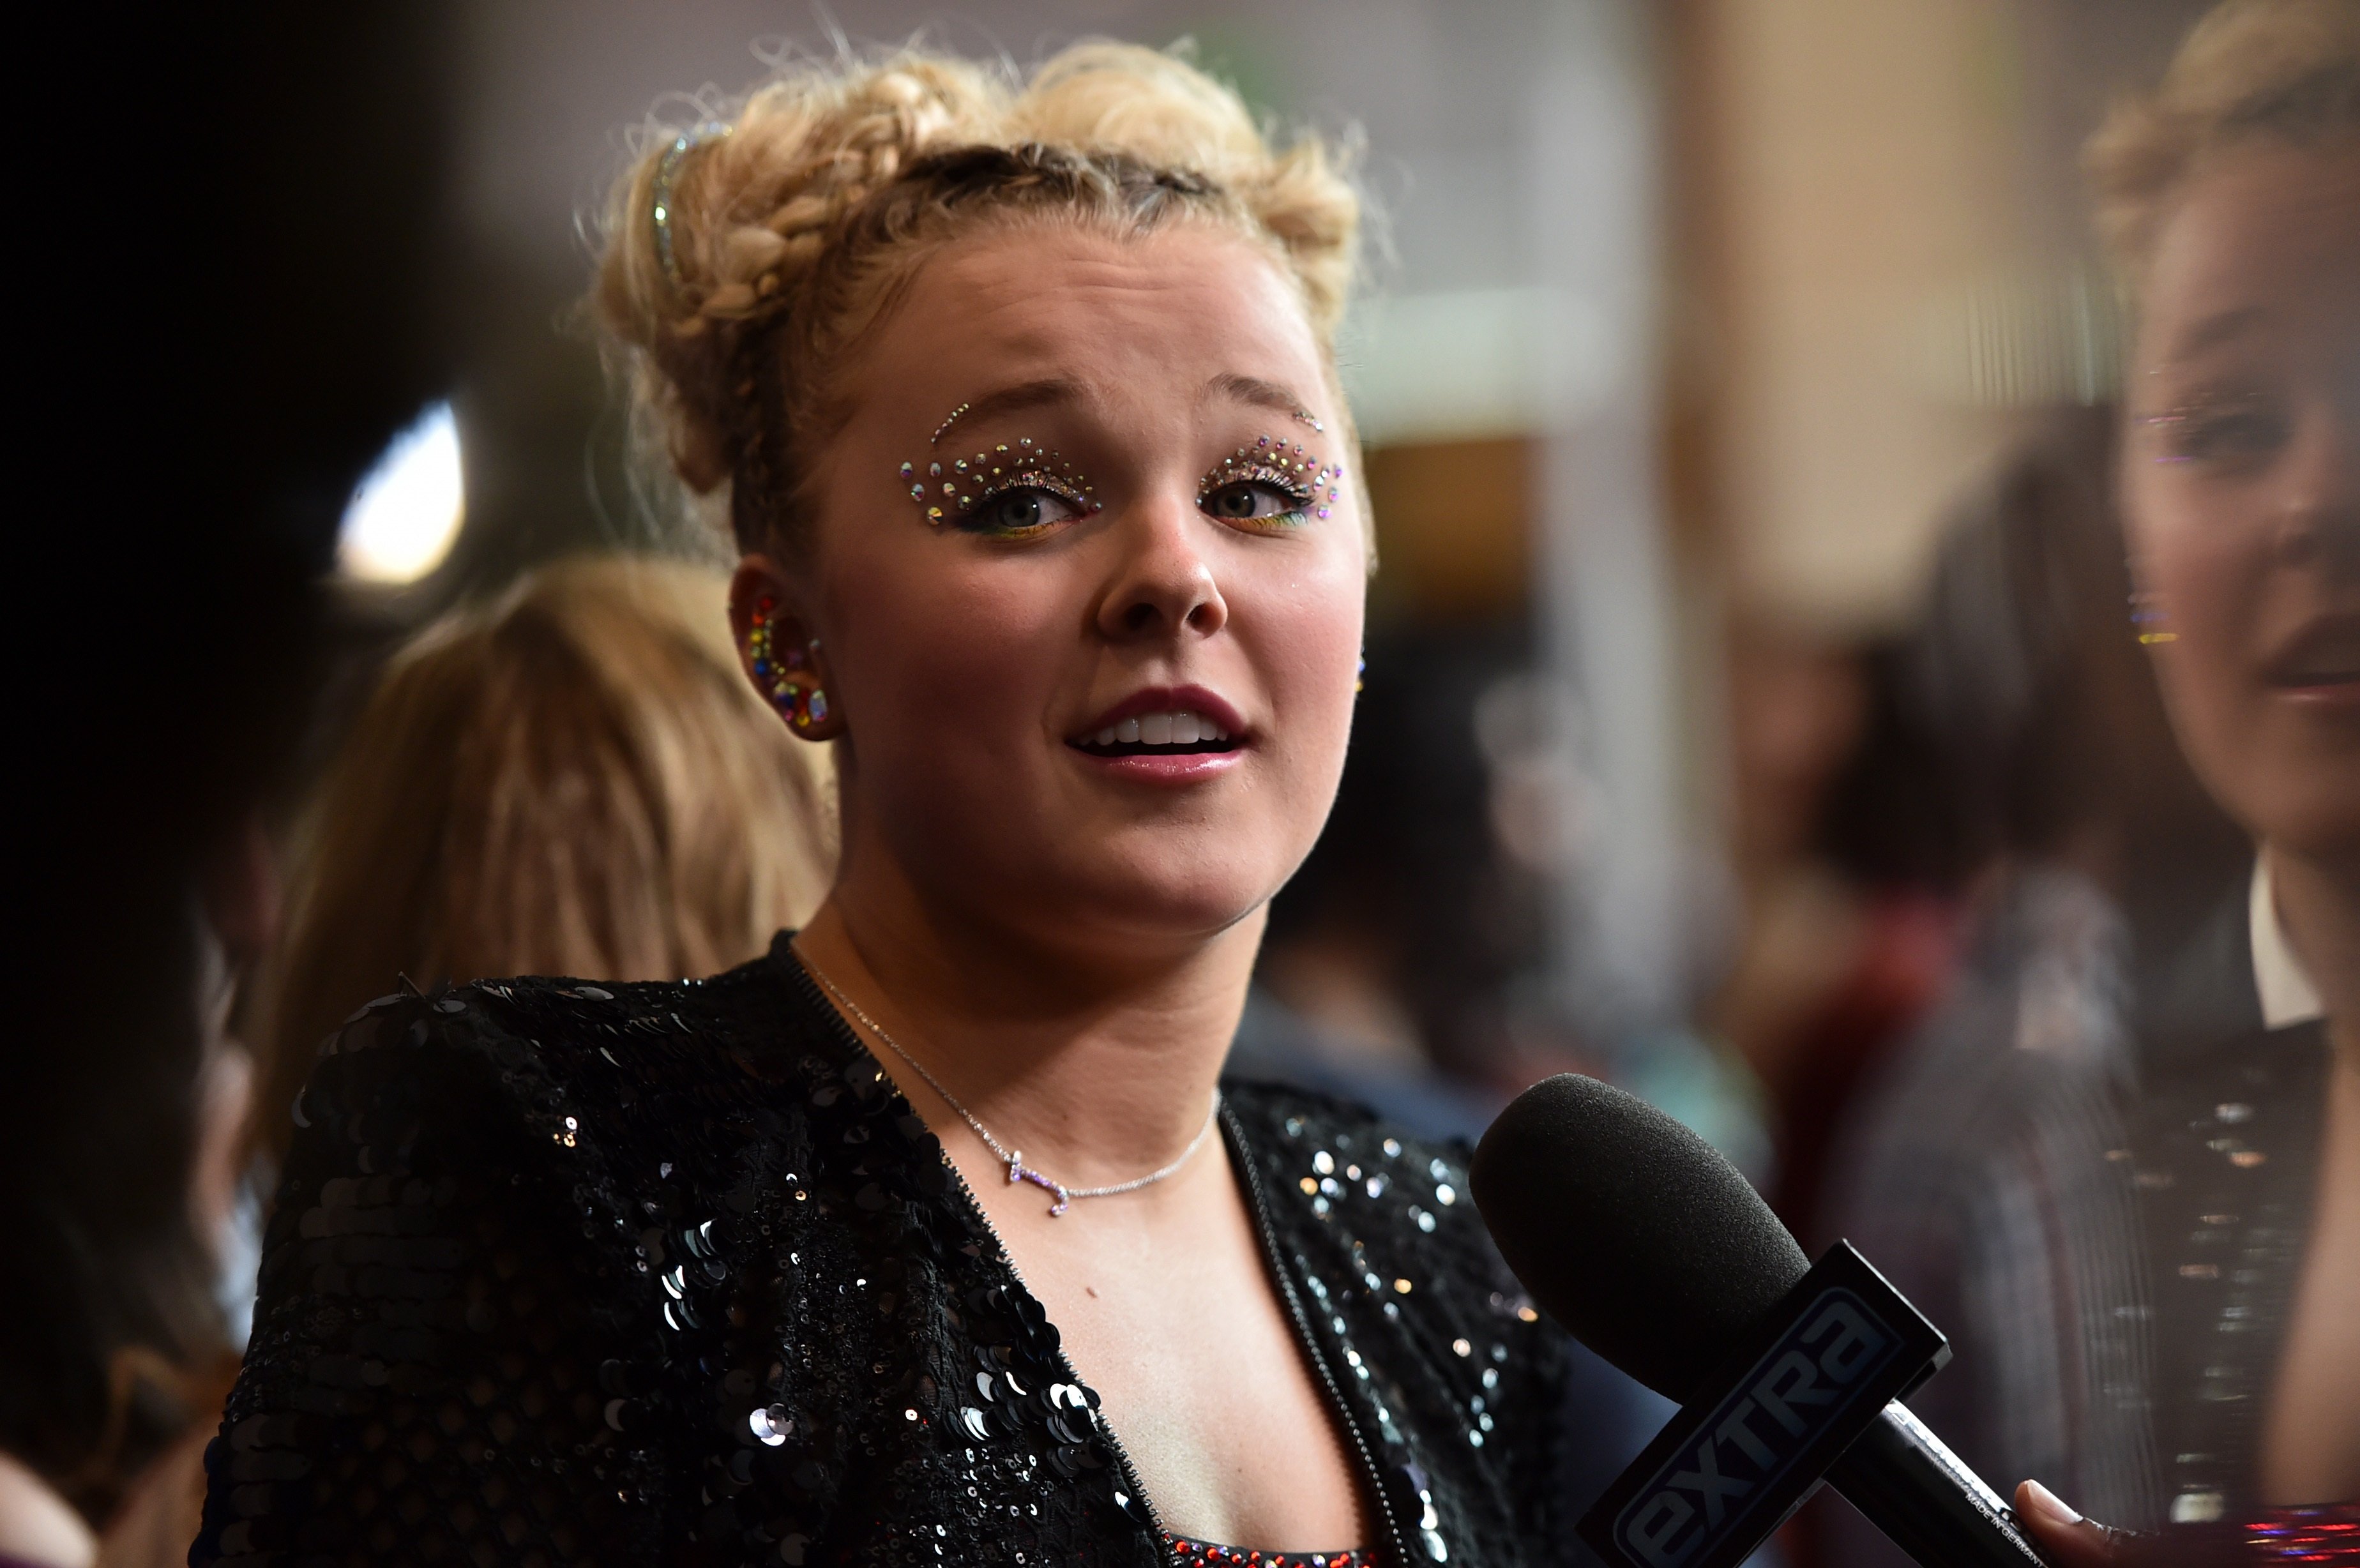 JoJo Siwa, founder of XOMG POP! featured on 'AGT,' looks surprised at the 33rd Annual GLADD media awards